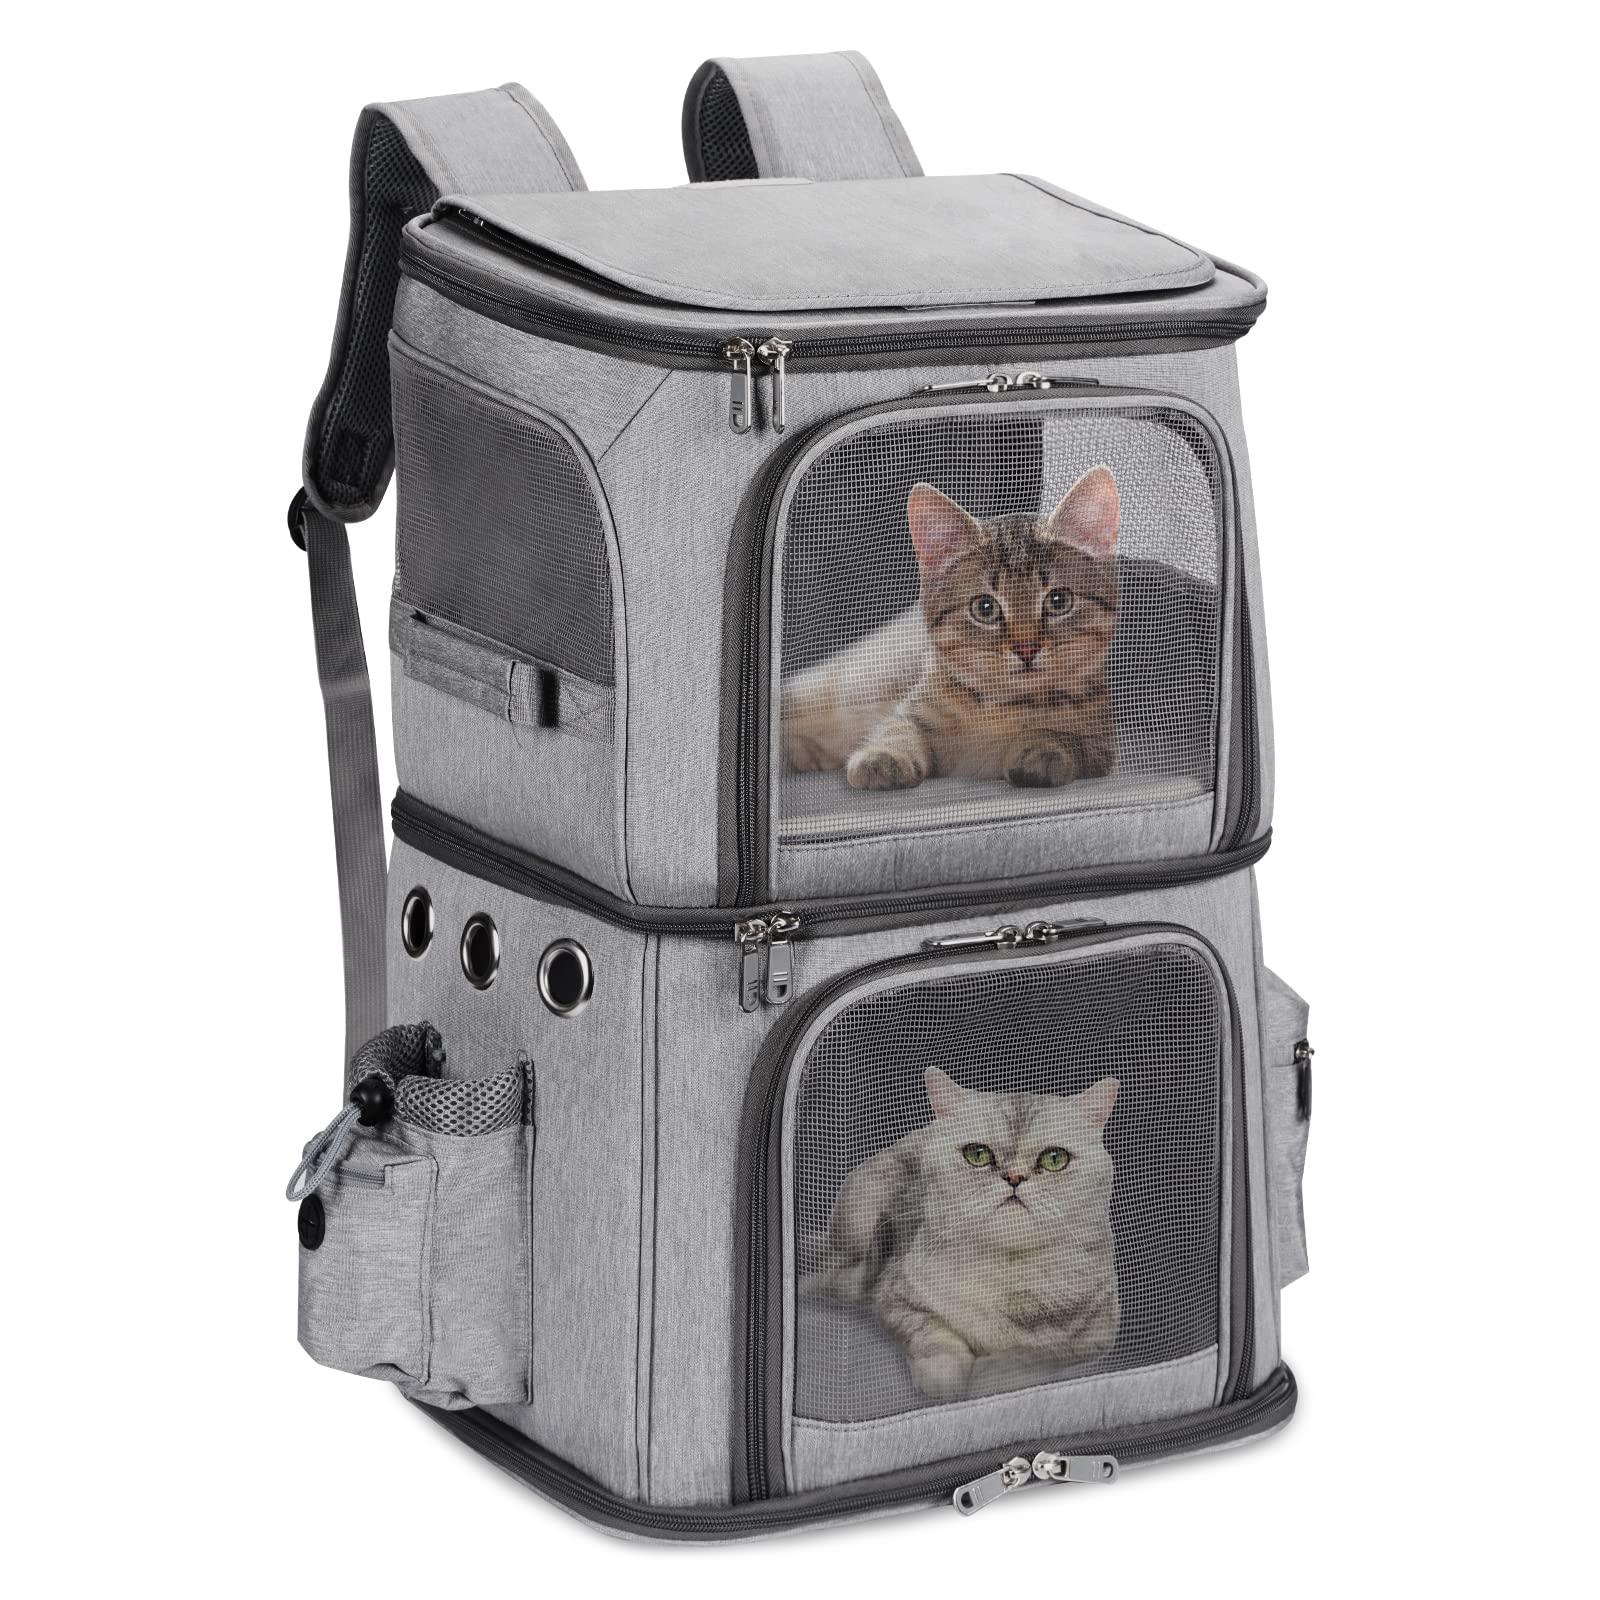 HOVONO Double-compartment Pet carrier Backpack for Small cats and Dogs, cat Travel carrier for 2 cats, Perfect for TravelingHiki